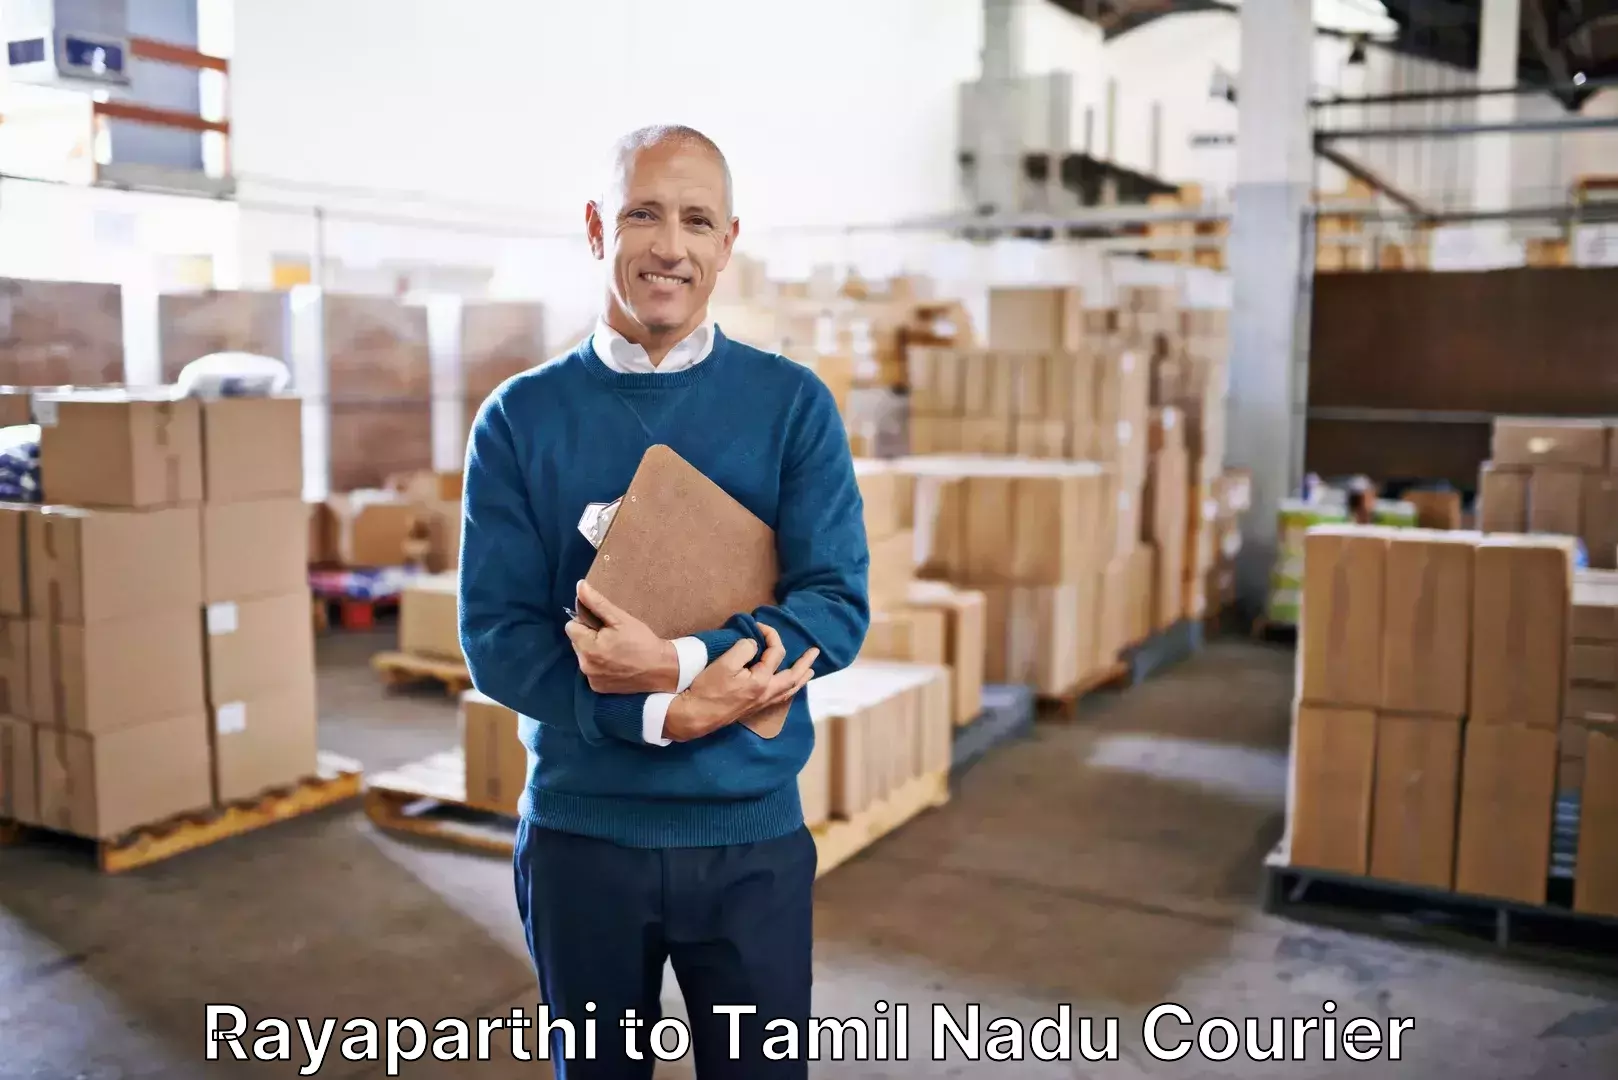 Baggage transport network Rayaparthi to Vellore Institute of Technology